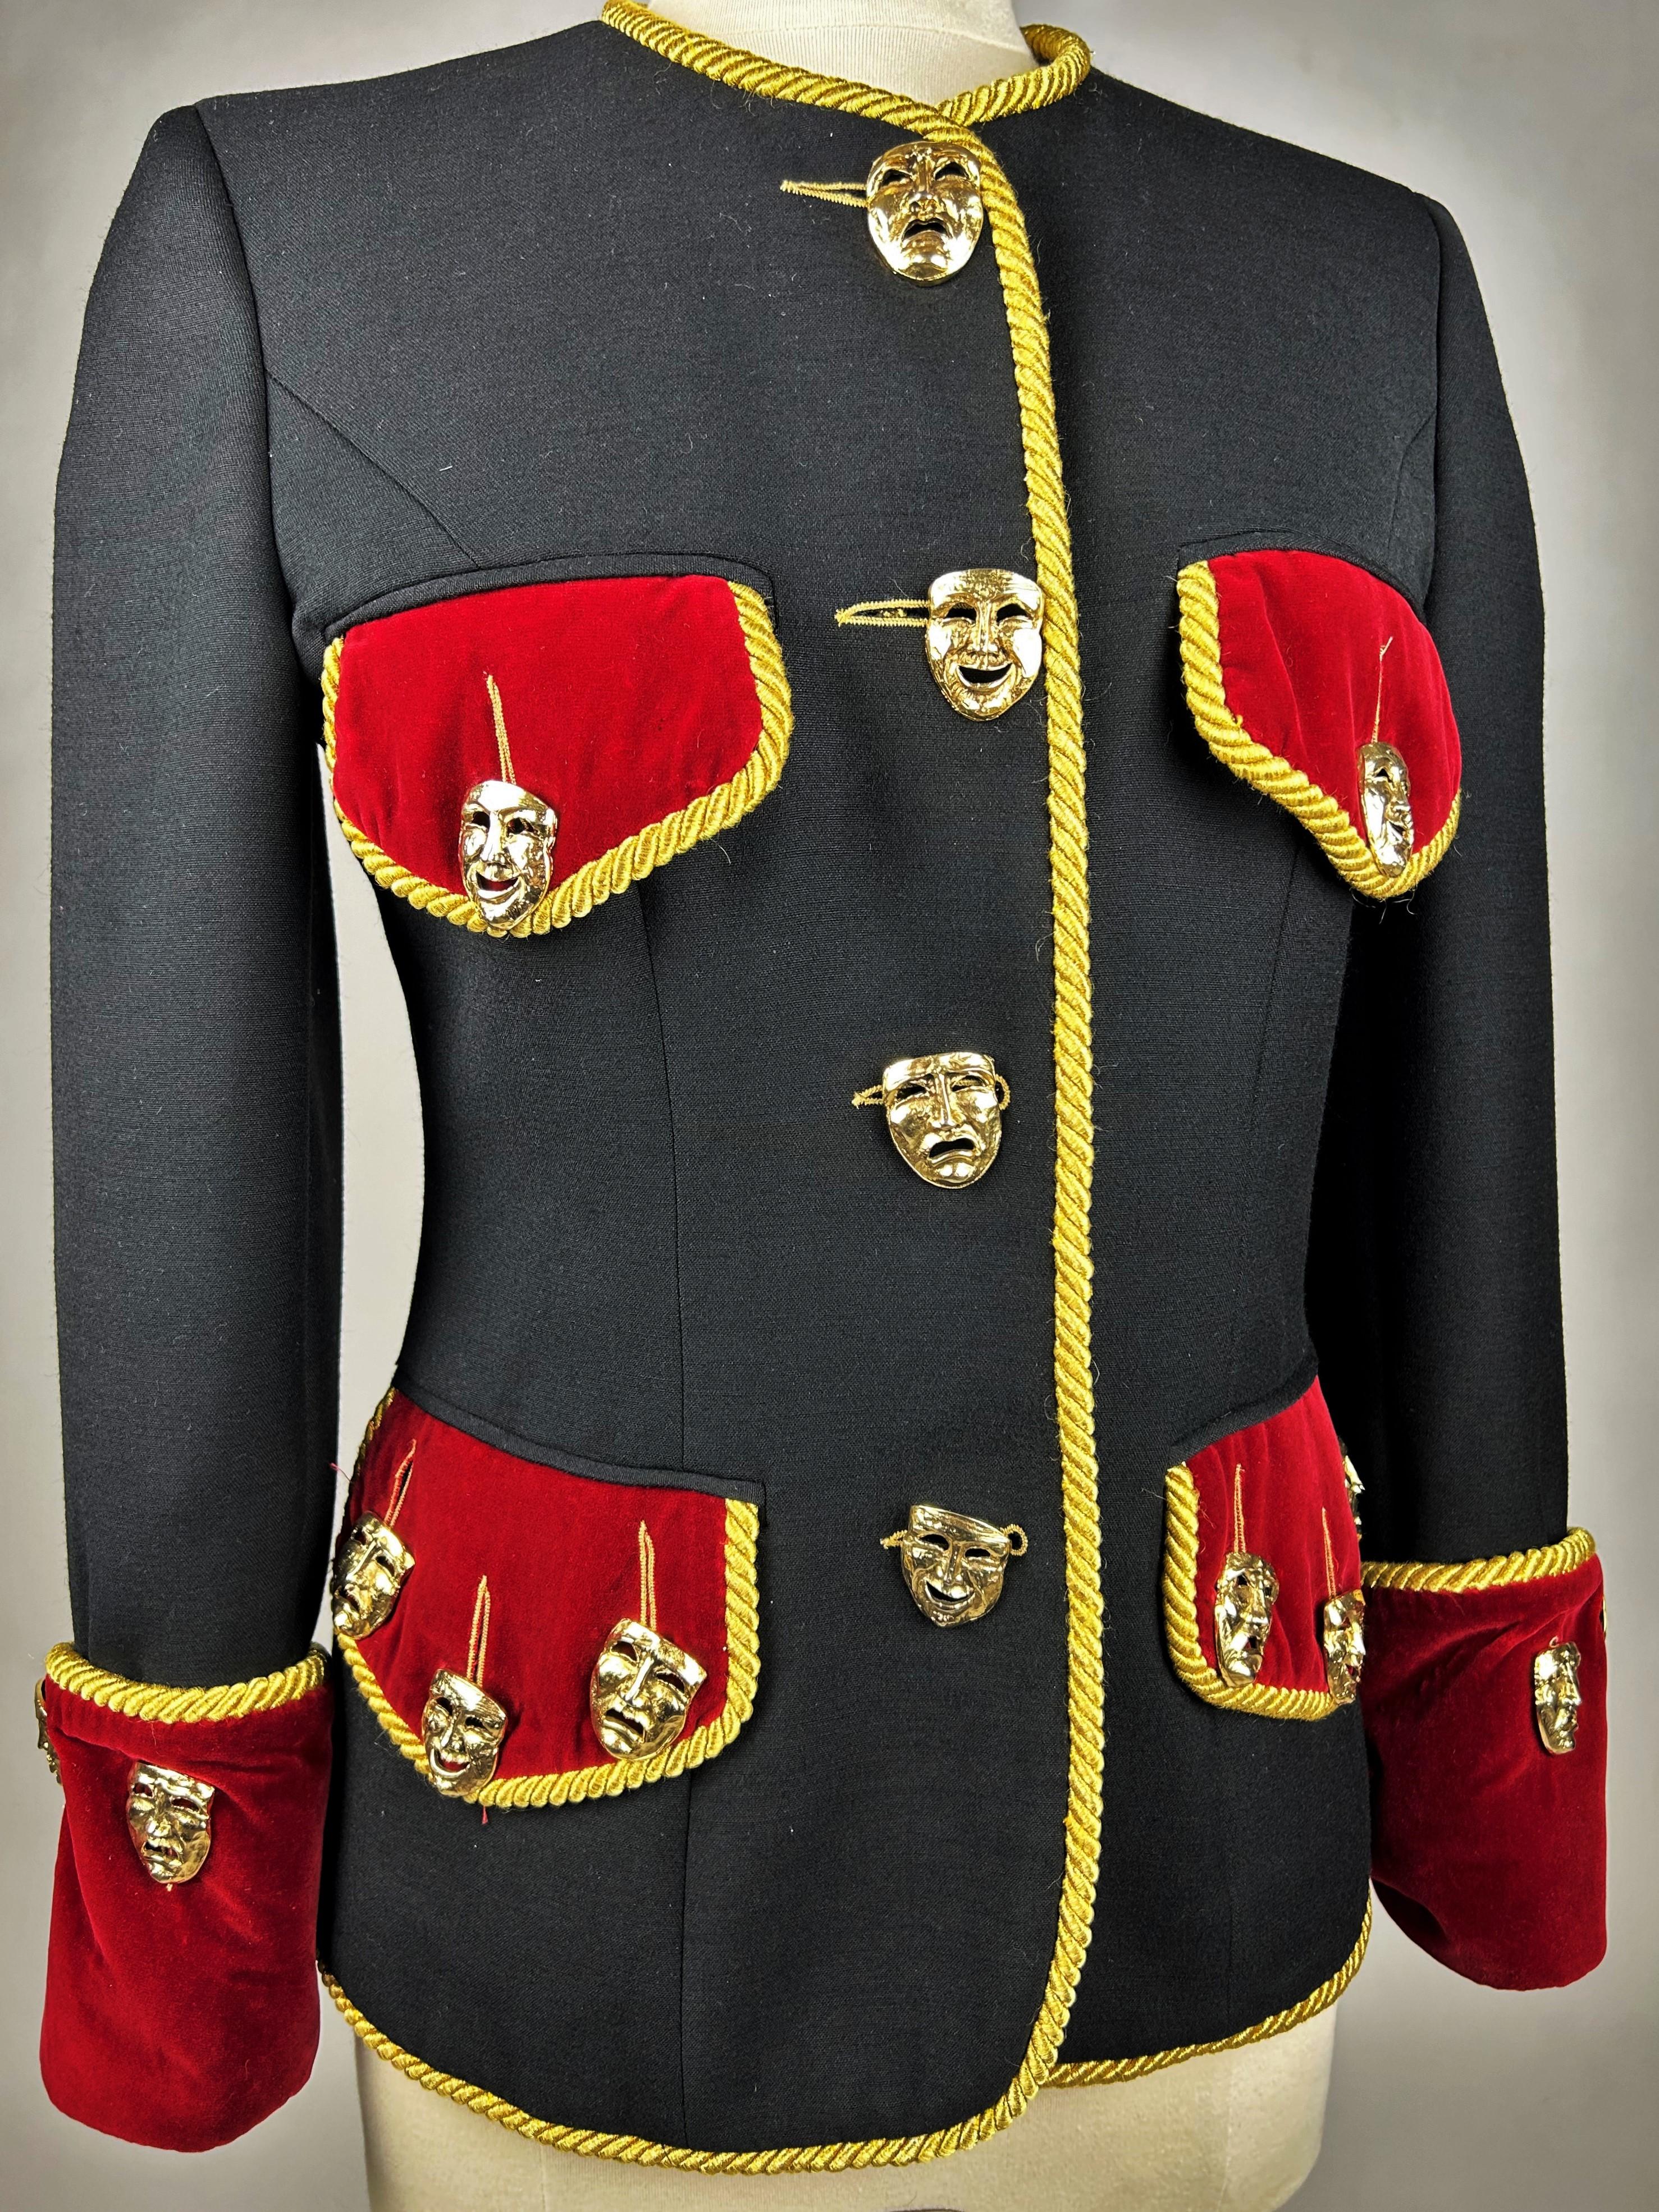 An Evening Jacket by Franco Moschino Couture Circa 1990 For Sale 5